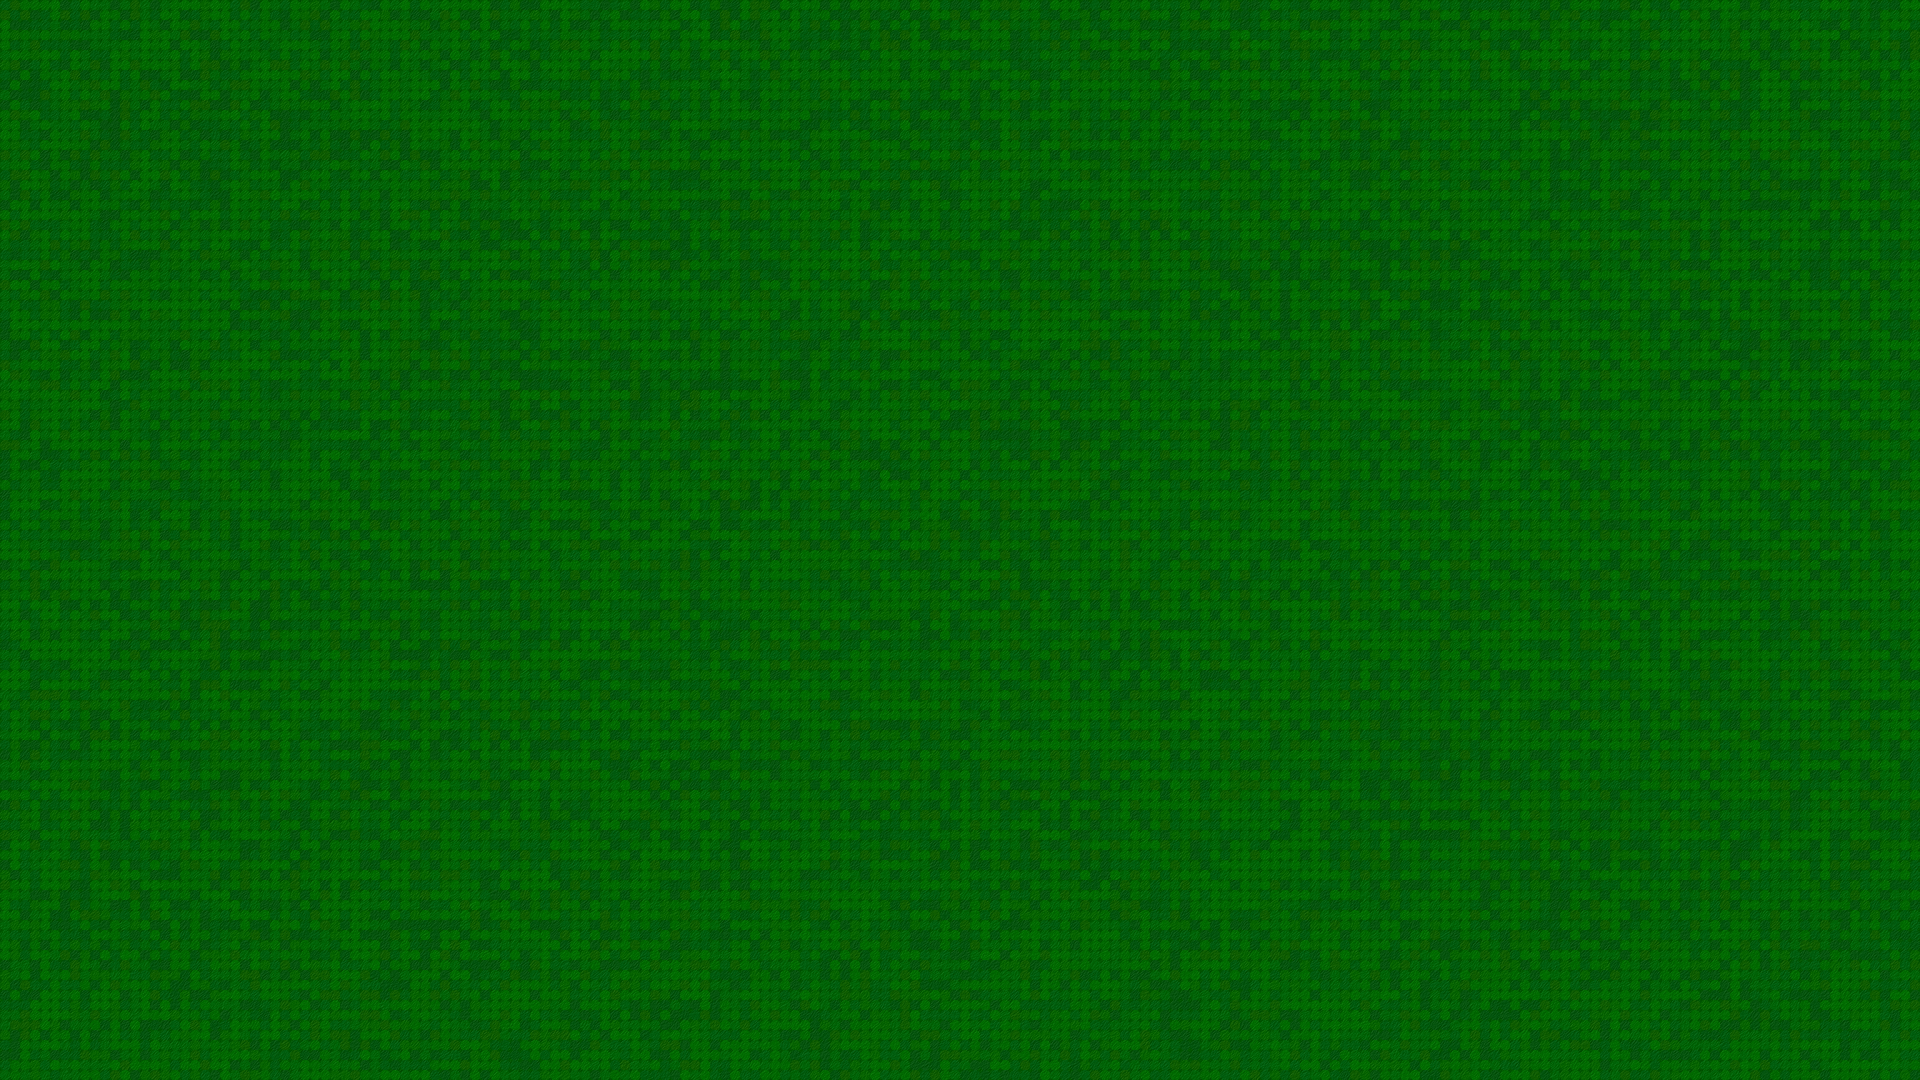 General 1920x1080 circle green background texture